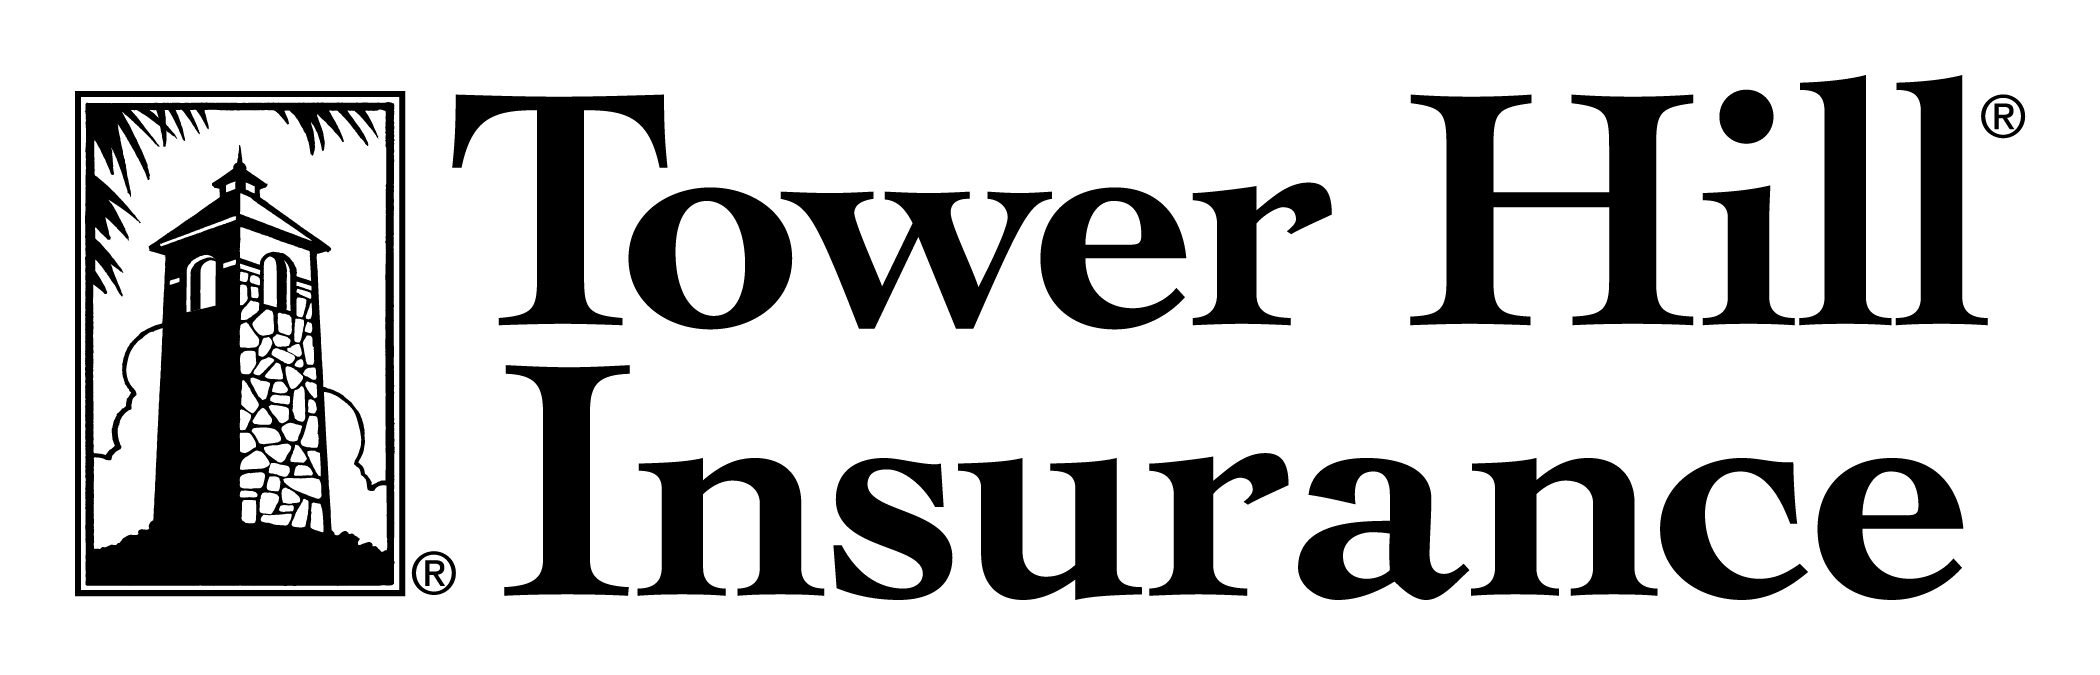 tower hill insurance